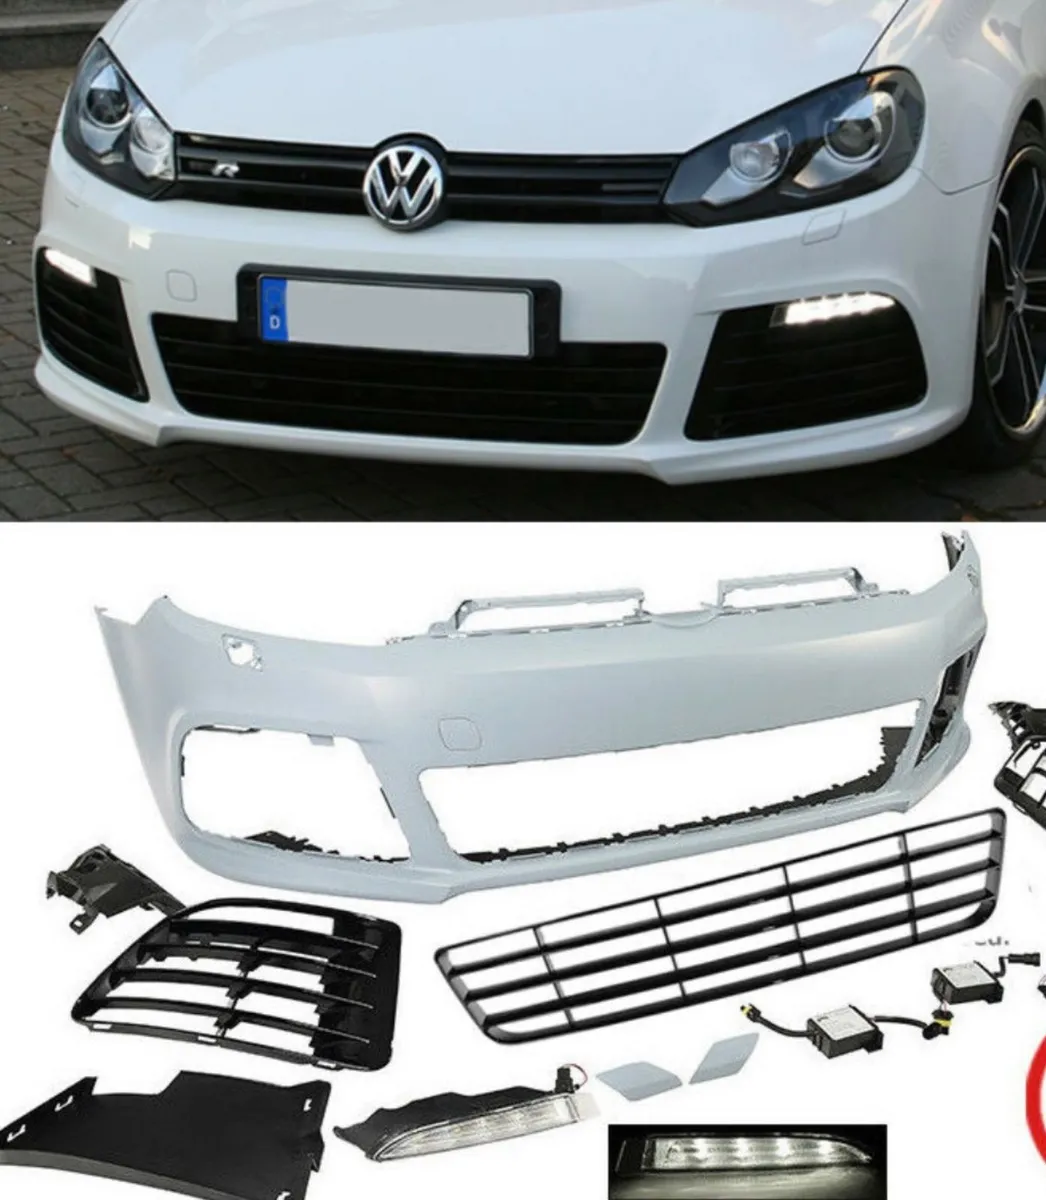 Vw golf R20 front bumper conversion & grill offer